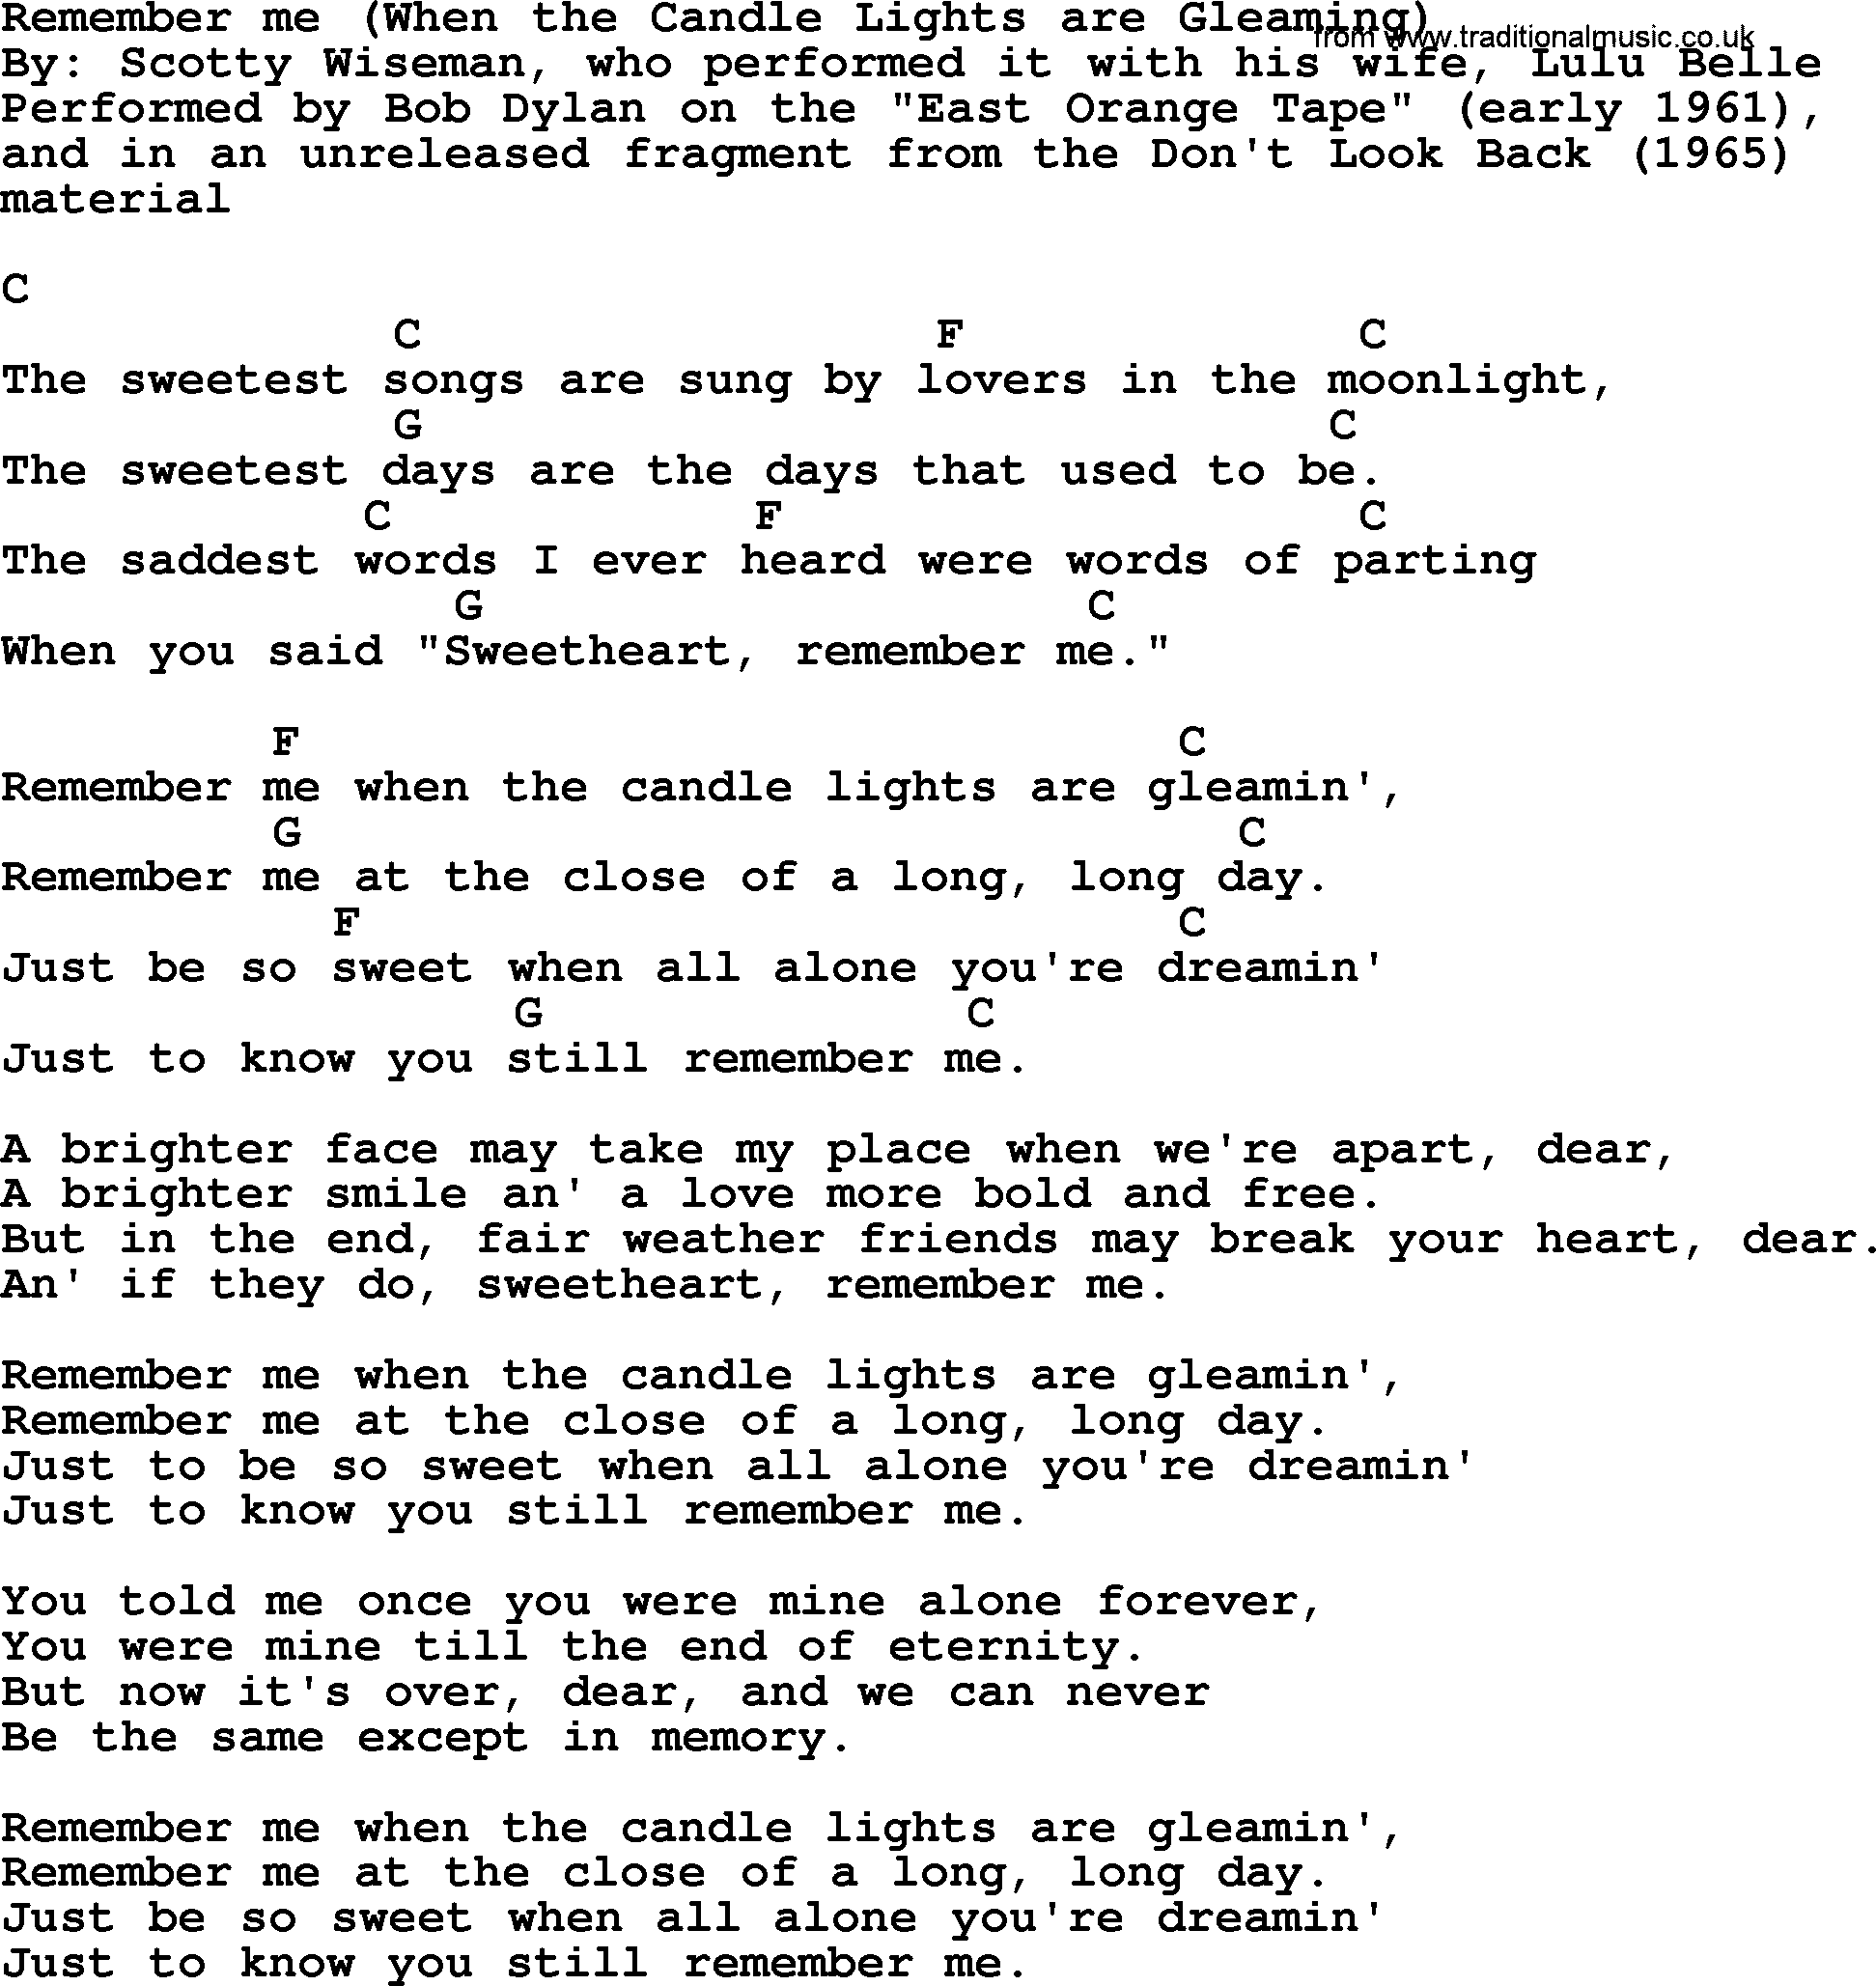 Bob Dylan song, lyrics with chords - Remember me (When the Candle Lights are Gleaming)